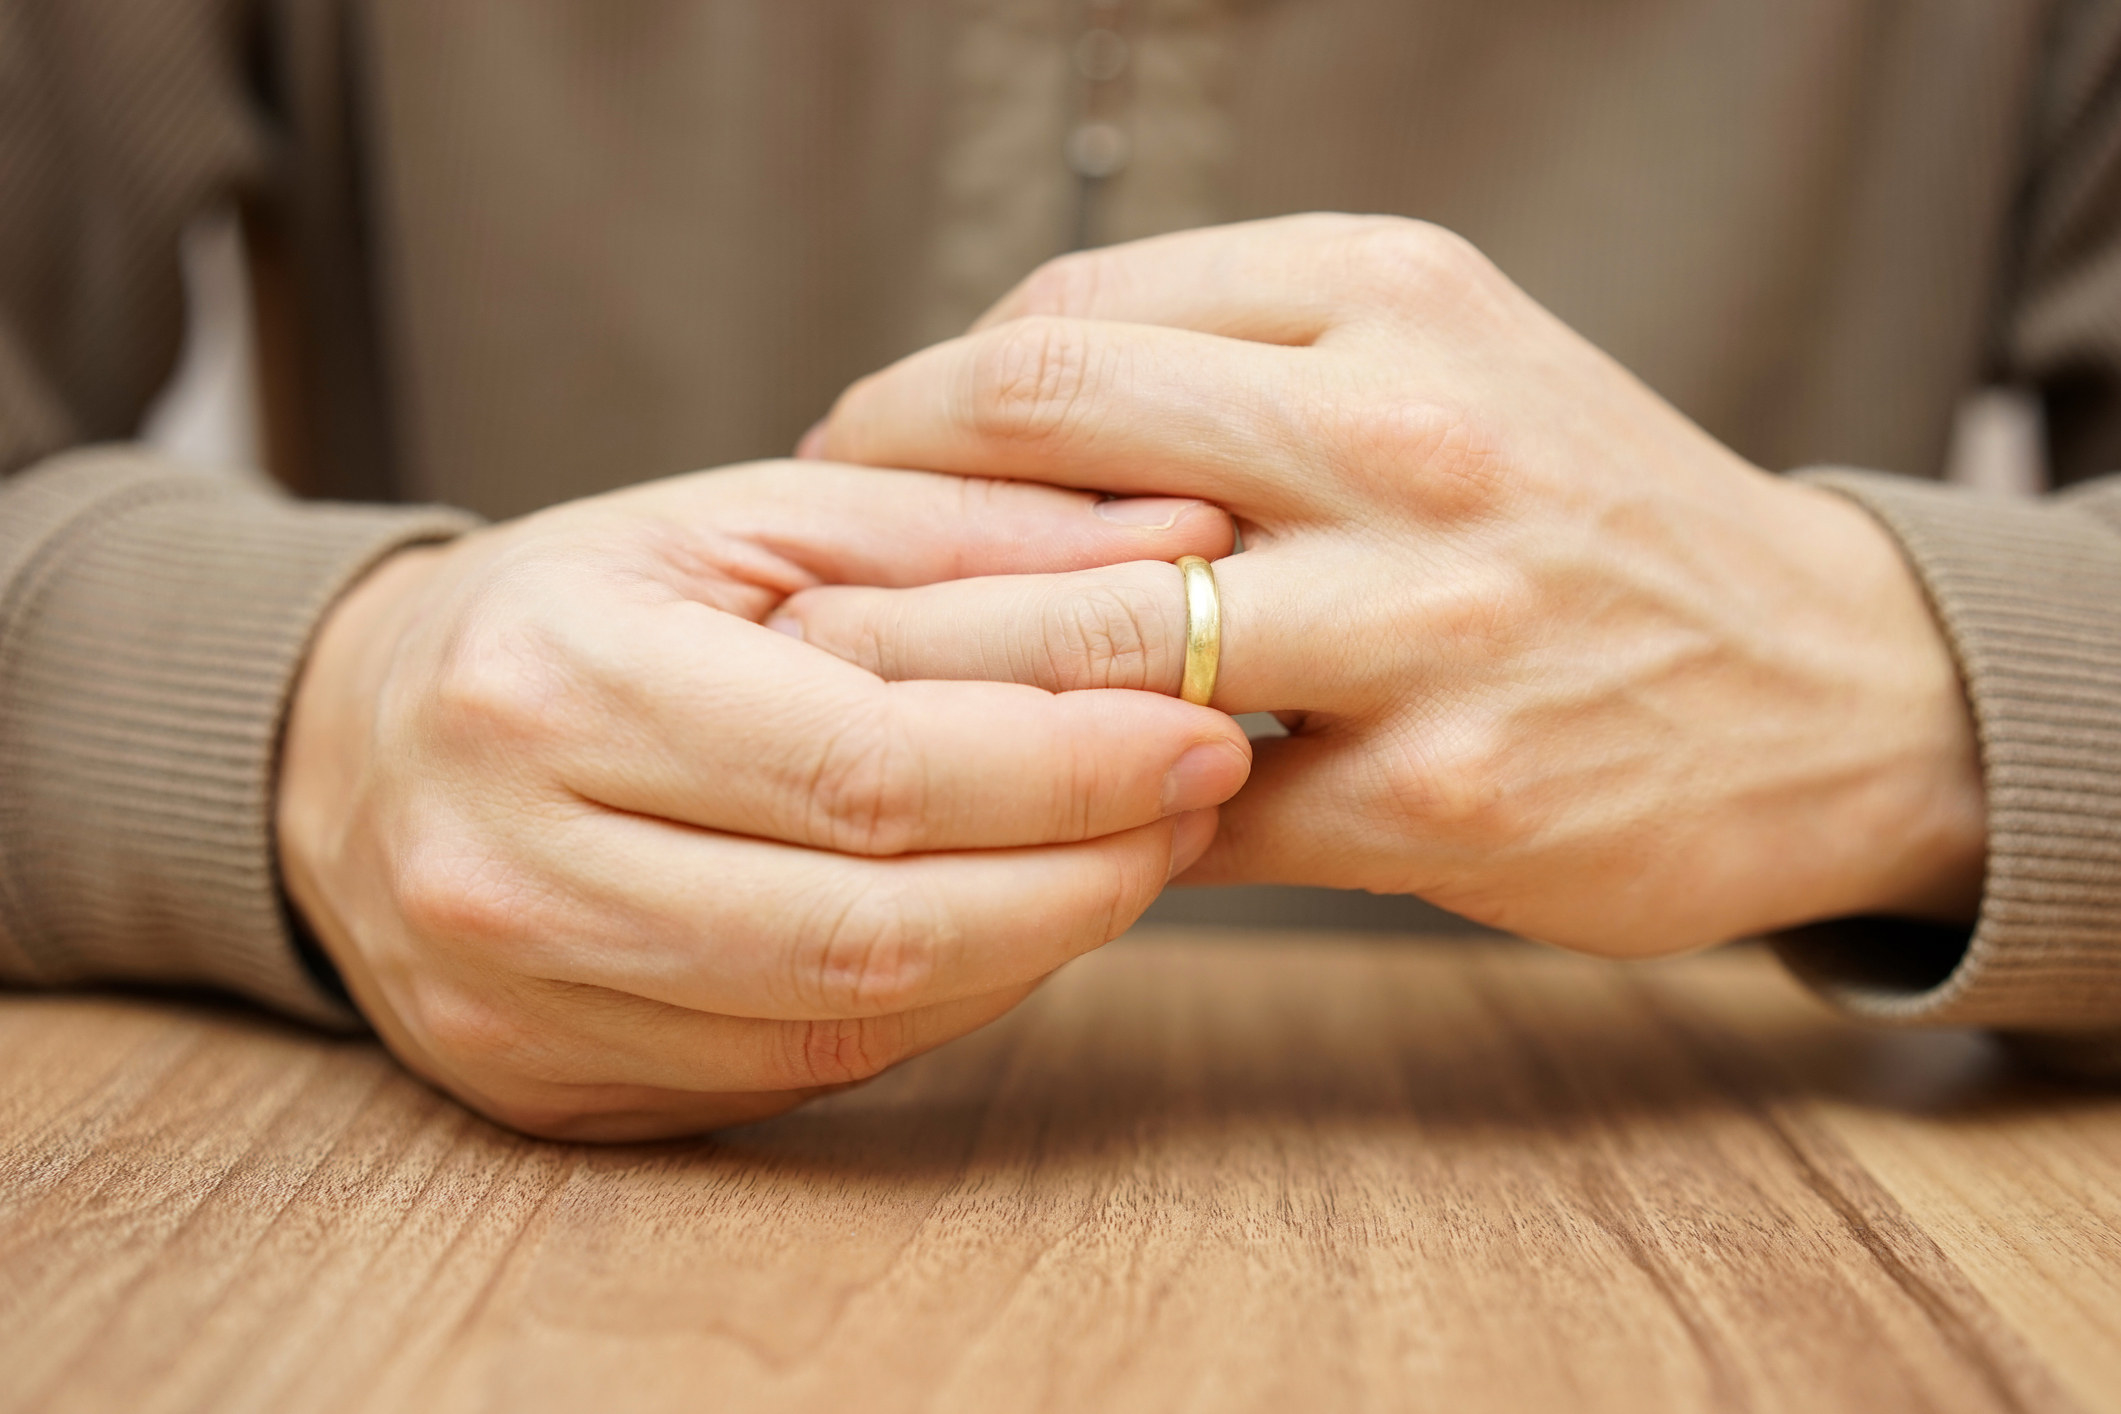 Hands removing a wedding ring